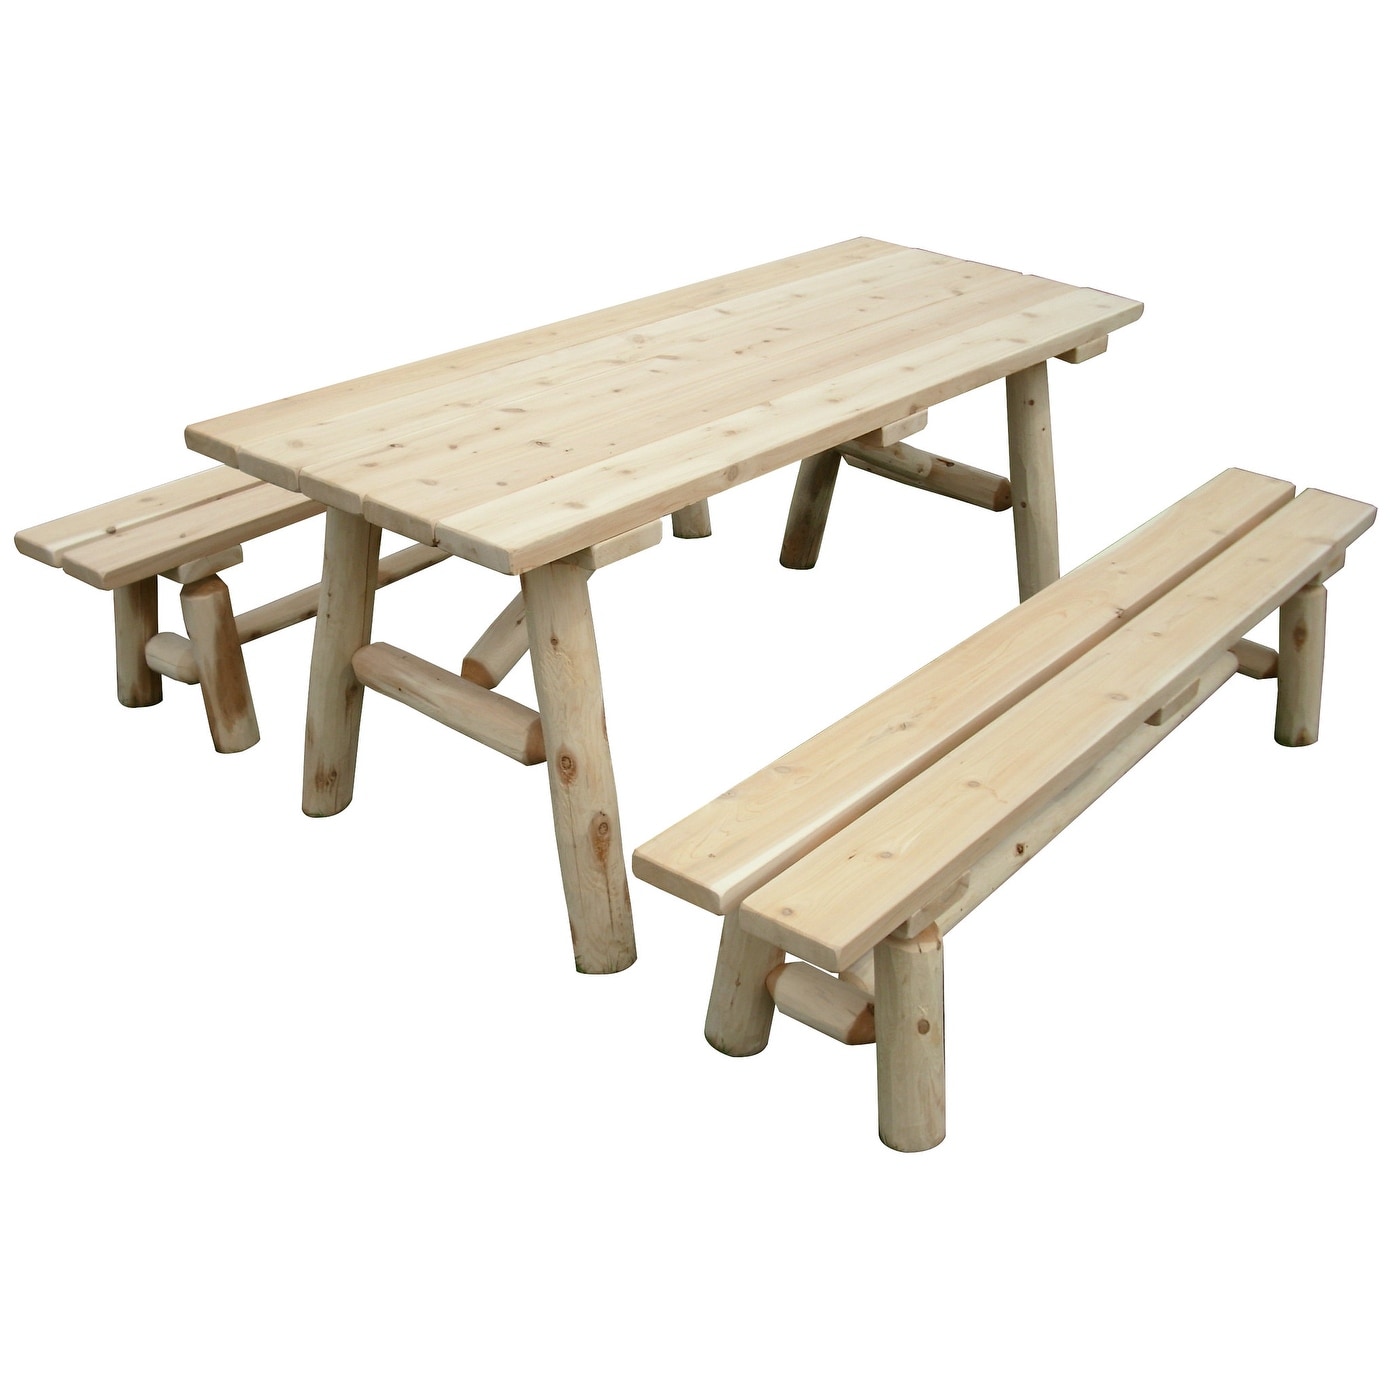 White Cedar Log 6 Picnic Table With Detached Benches